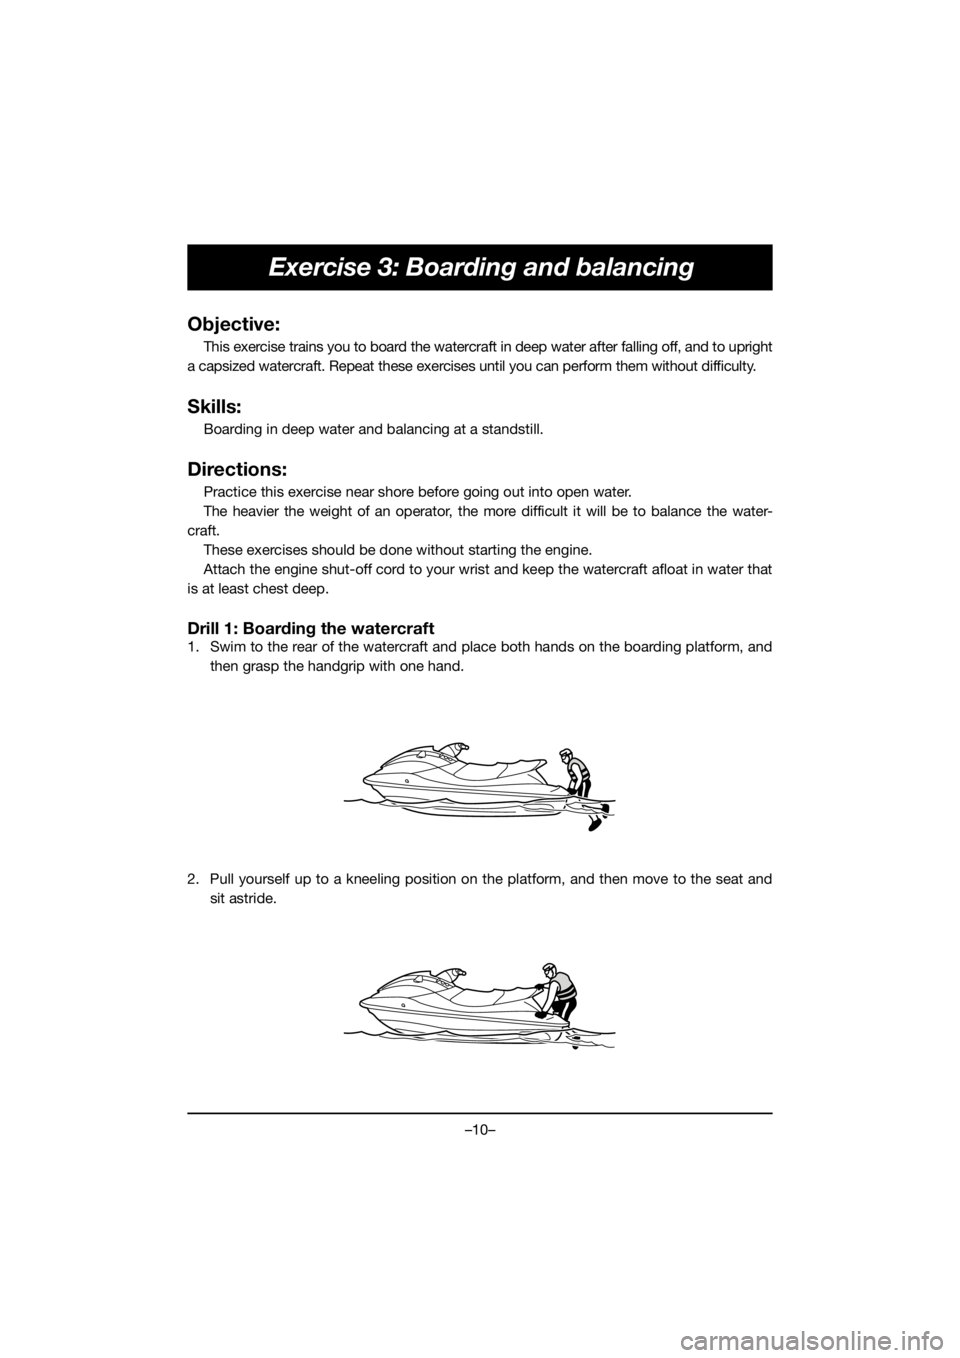 YAMAHA EX 2021  Manuale duso (in Italian) –10–
Exercise 3: Boarding and balancing
Objective:
This exercise trains you to board the watercraft in deep water after falling off, and to upright
a capsized watercraft. Repeat these exercises un